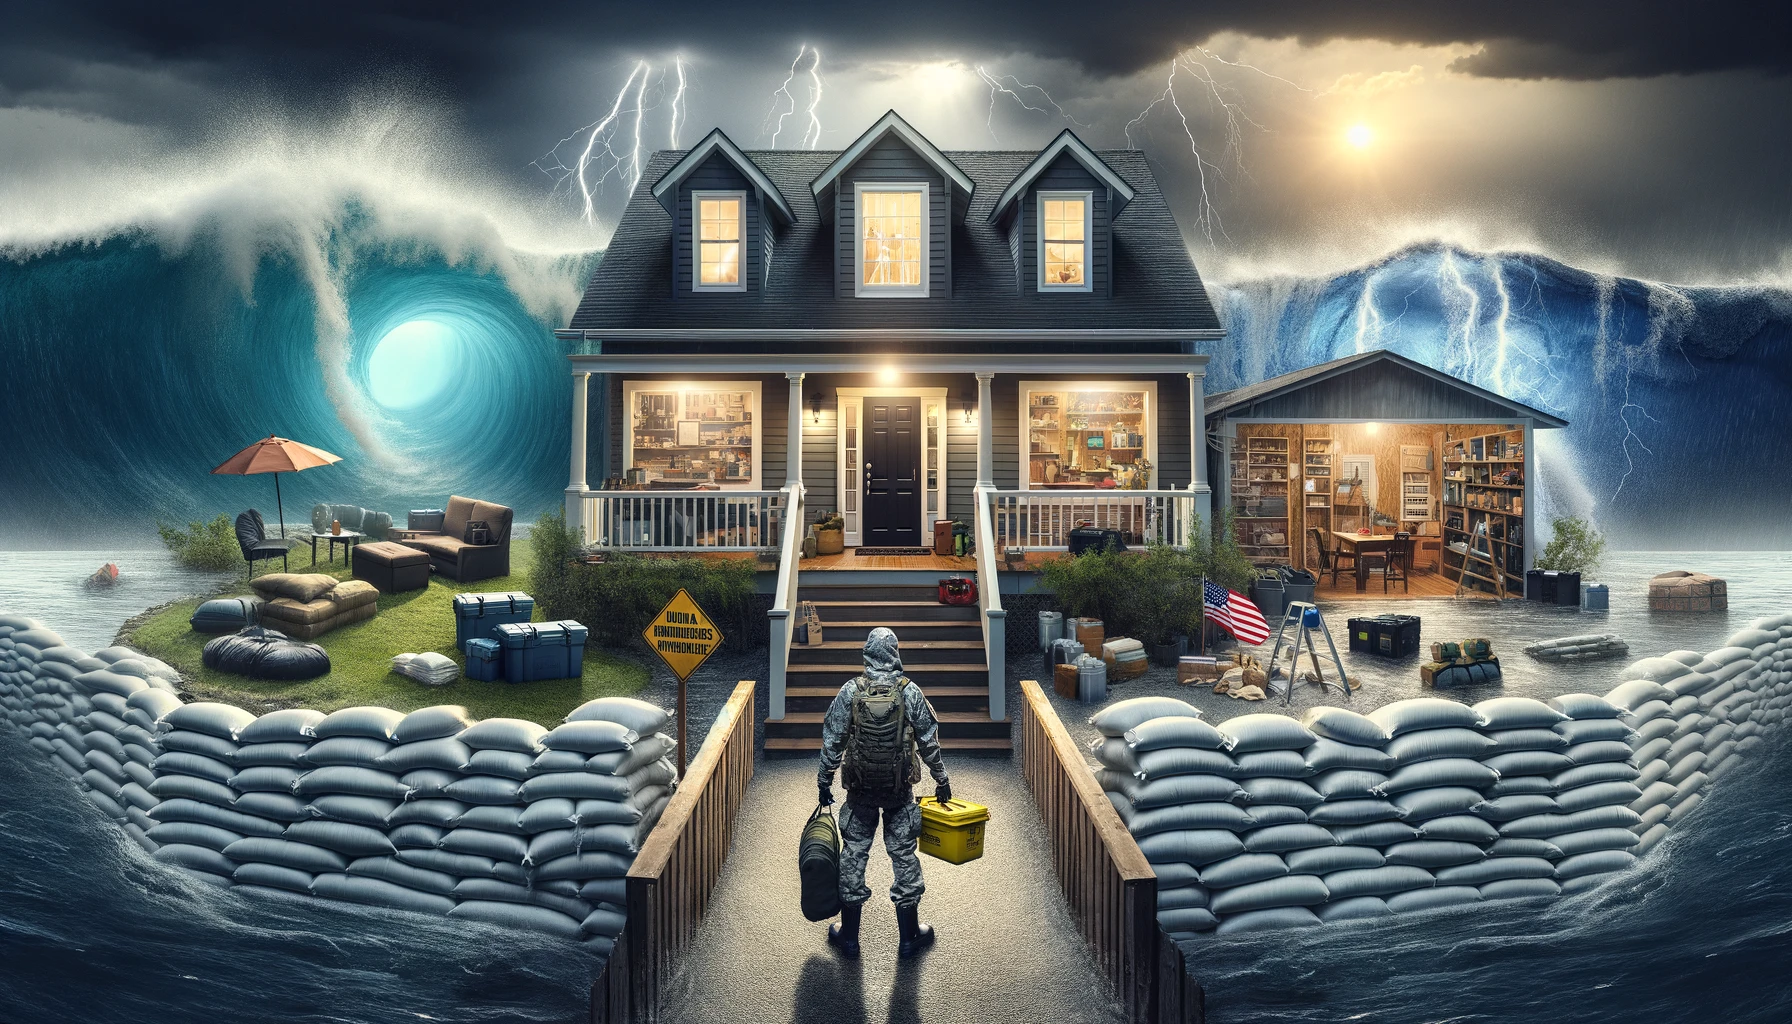 Prepper's home prepared for floods, earthquakes, and hurricanes with sandbags, structural reinforcements, and storm shutters, under a dramatic sky